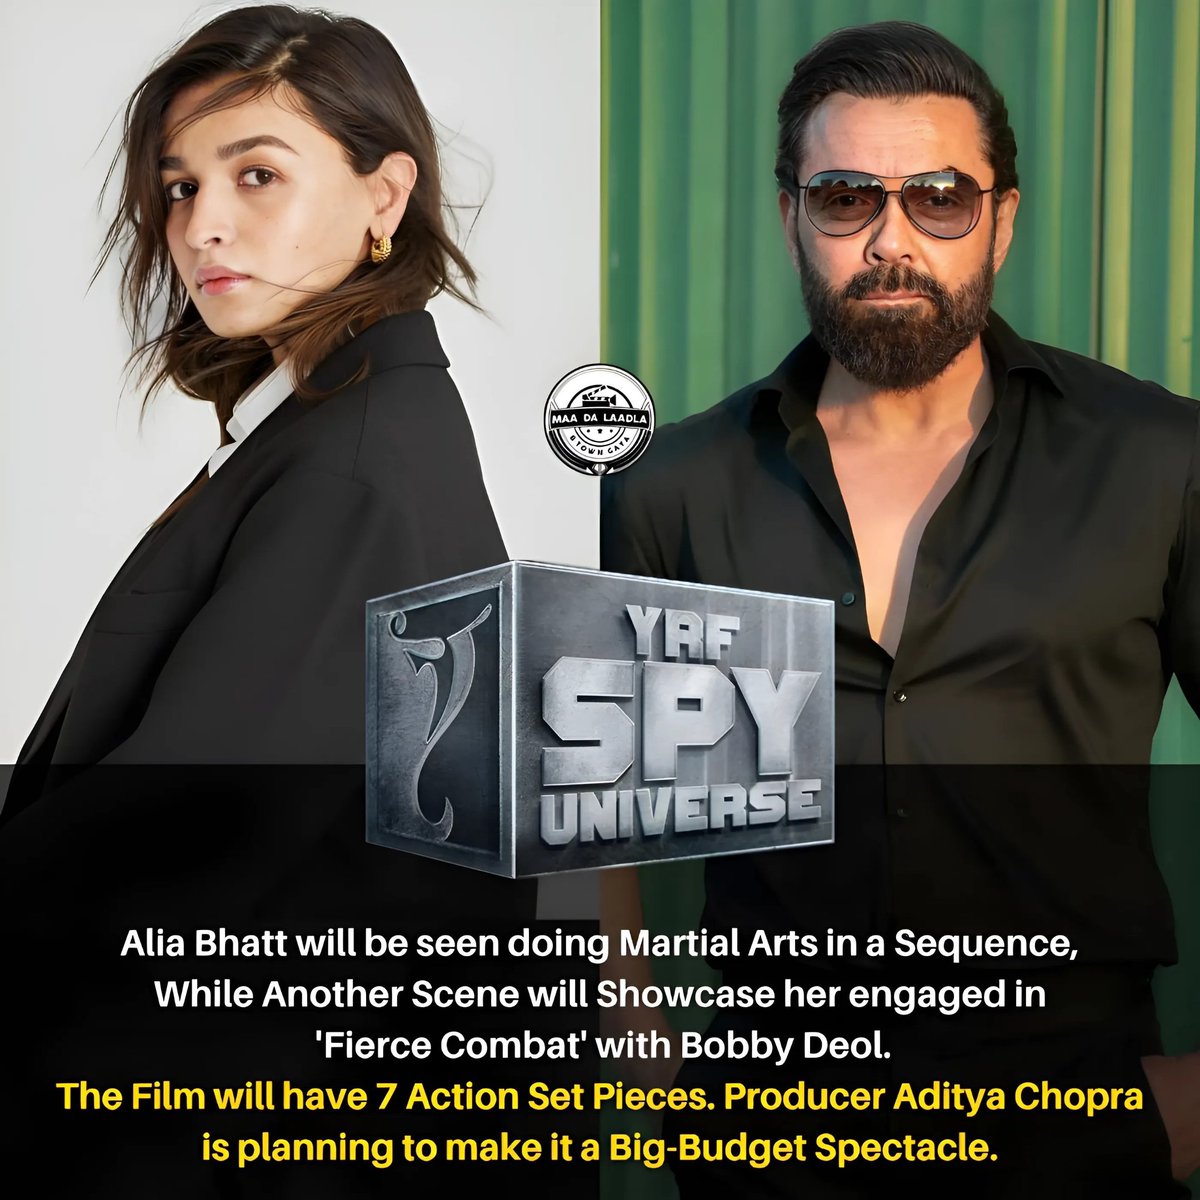 Co-starring #Sharvari. Directed by #ShivRawail who recently directed YRF's #TheRailwayMen. 

The film is expected to go on floors in the second half of 2024. 🔥🔥🔥

#AliaBhatt #BobbyDeol #YRFSpyUniverse 

@aliaa08 @thedeol @SharvariWagh14